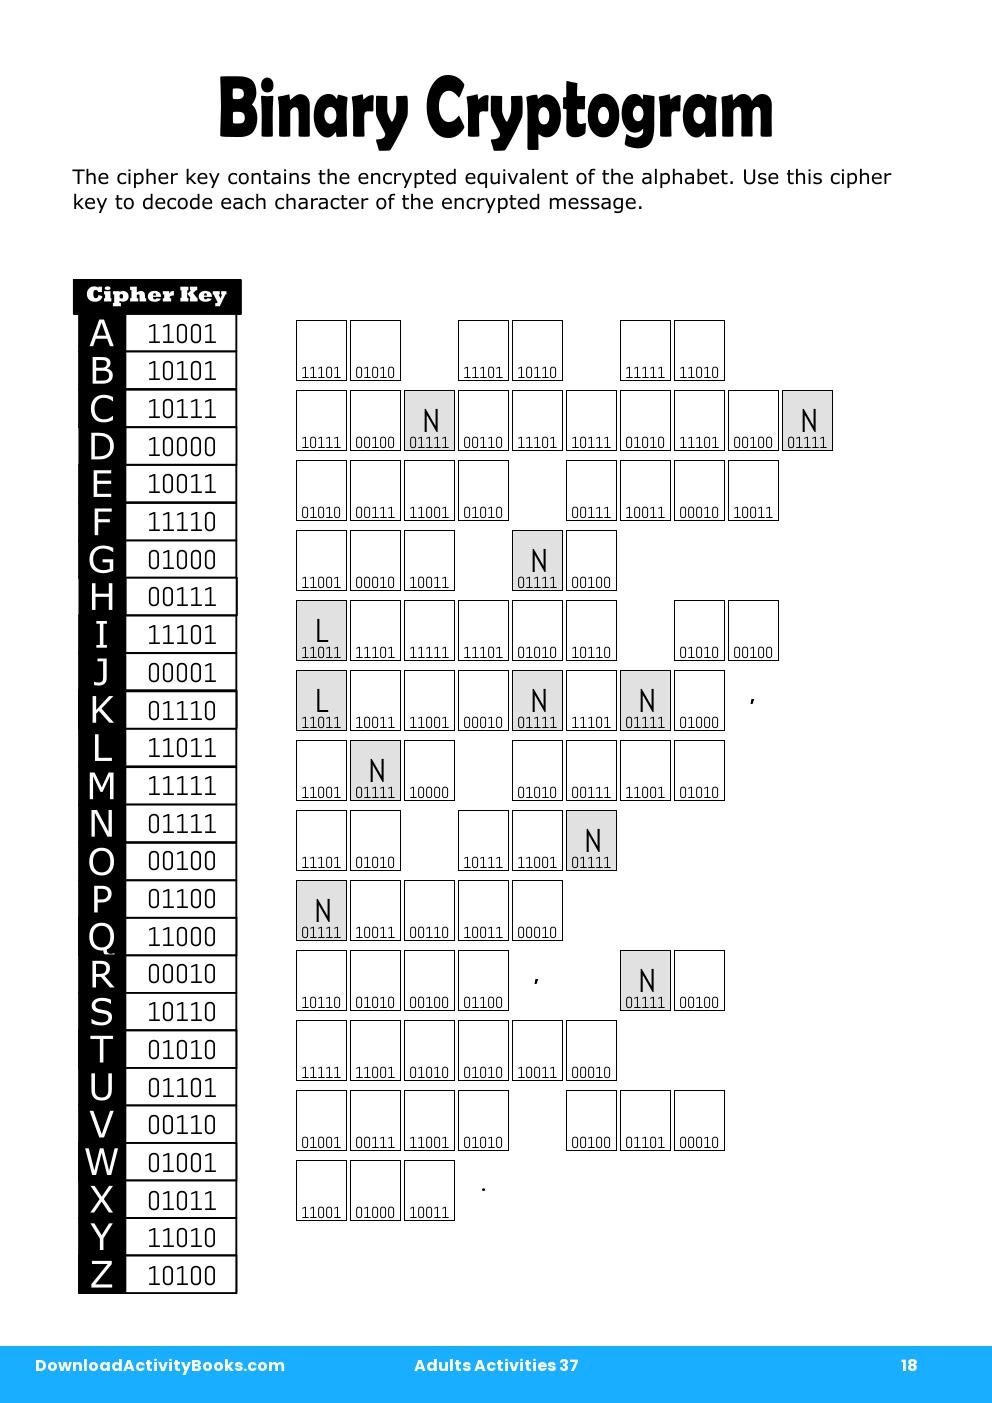 Binary Cryptogram in Adults Activities 37